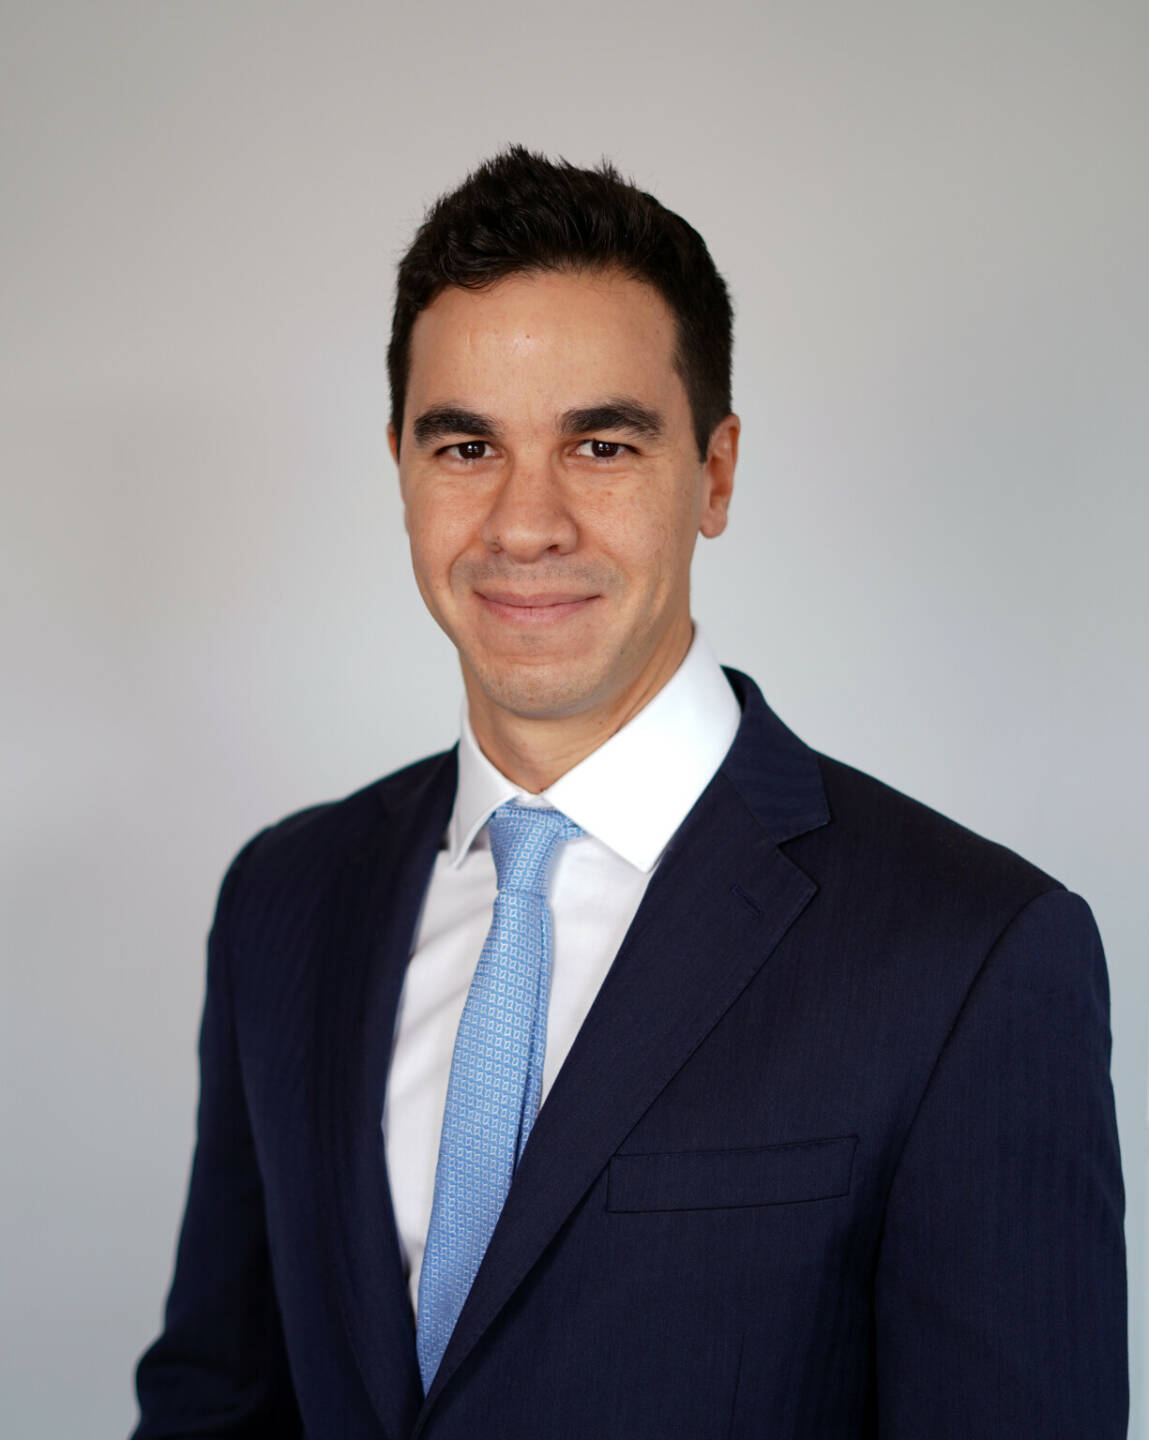 Paulo Salazar, Co-Head of Emerging Markets Equities bei Candriam; Credit: Candriam